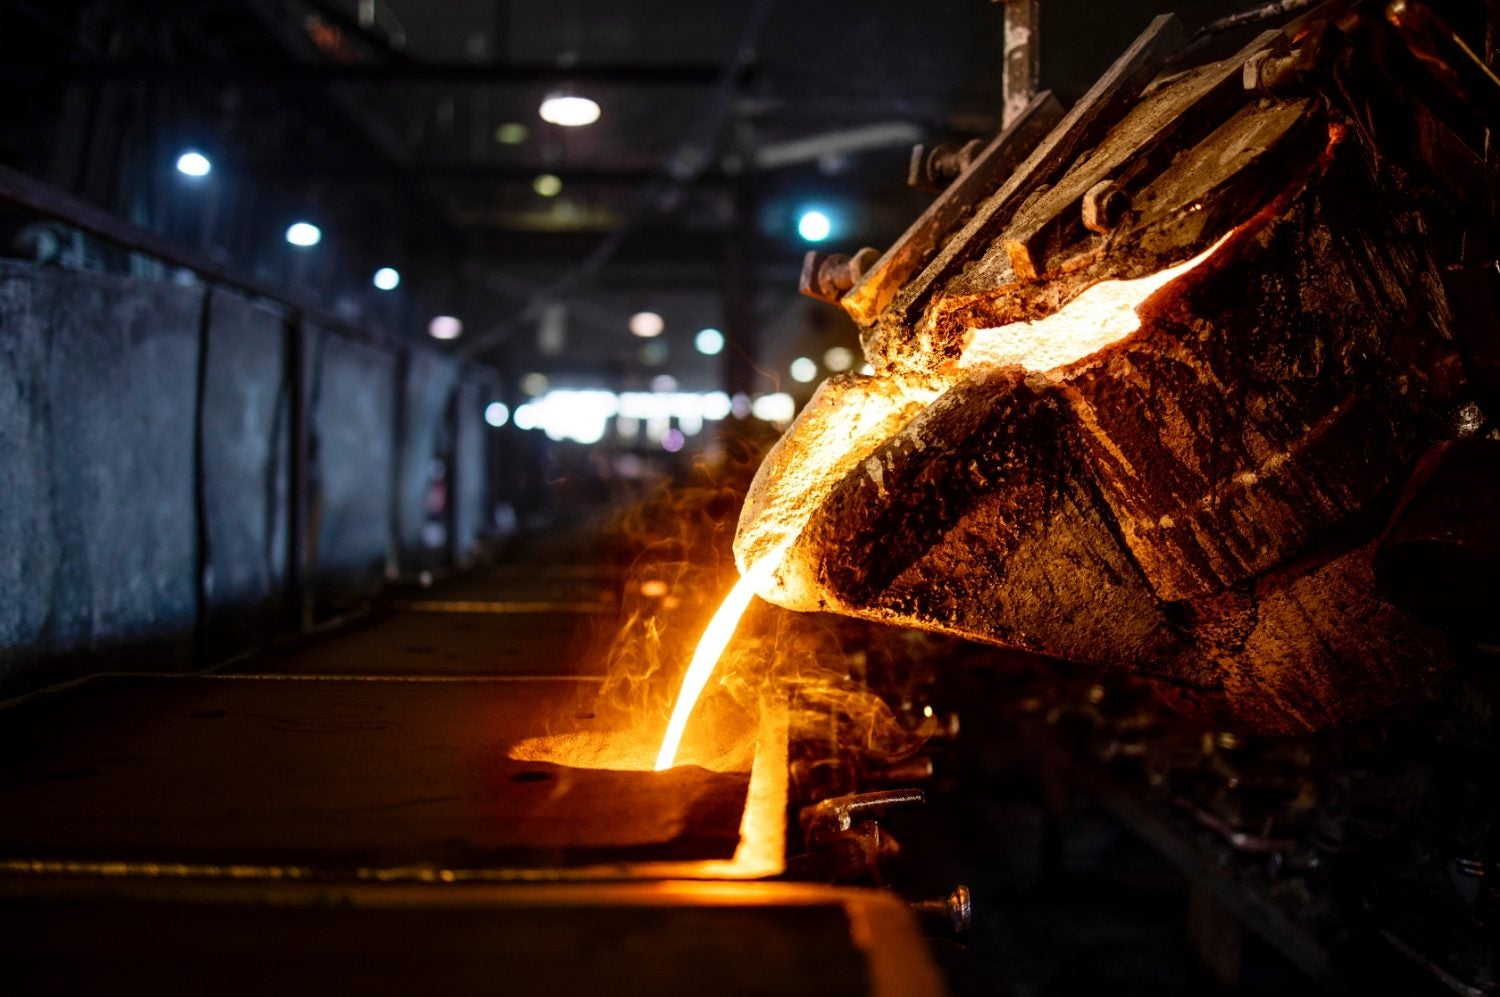 Metal being poured during the smelting process